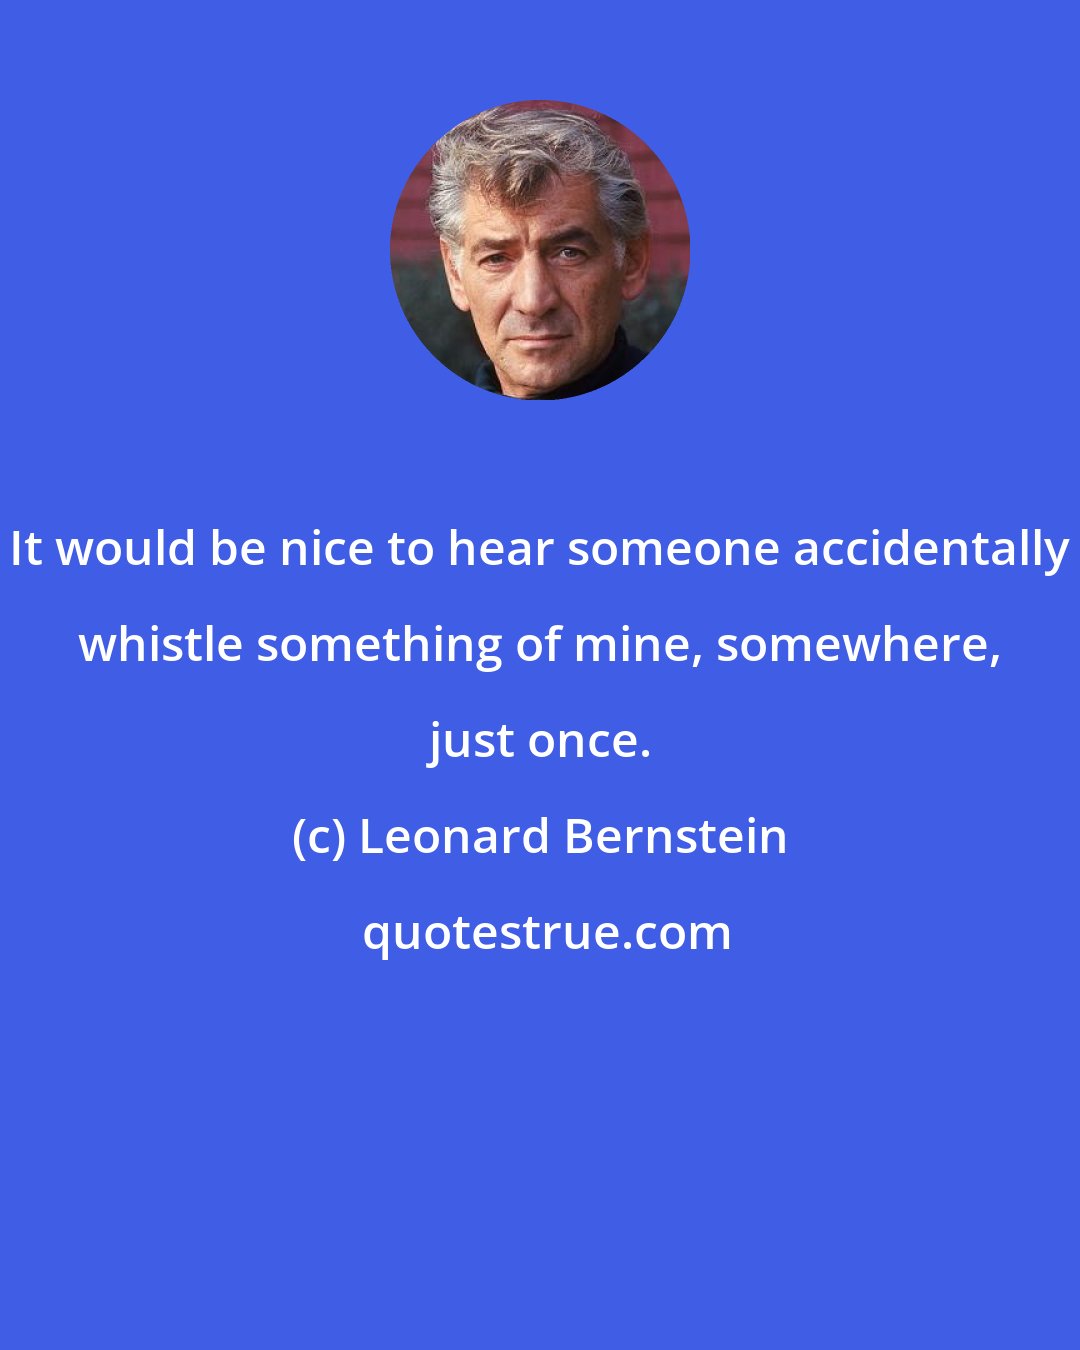 Leonard Bernstein: It would be nice to hear someone accidentally whistle something of mine, somewhere, just once.